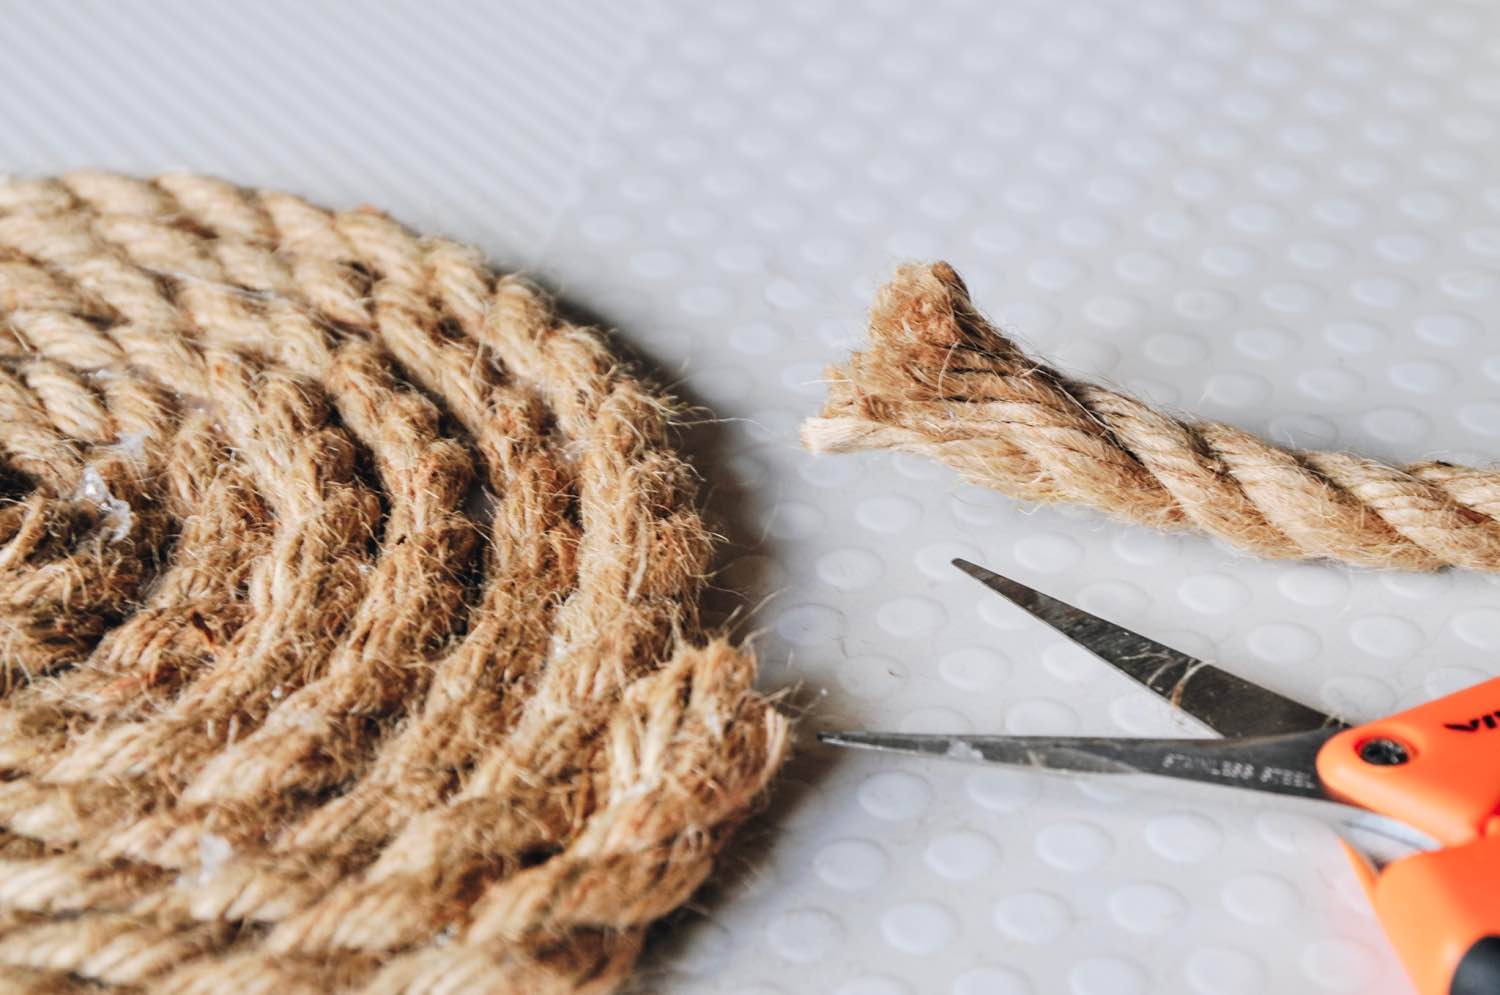 finish by cutting the rope diy hot plate trivet